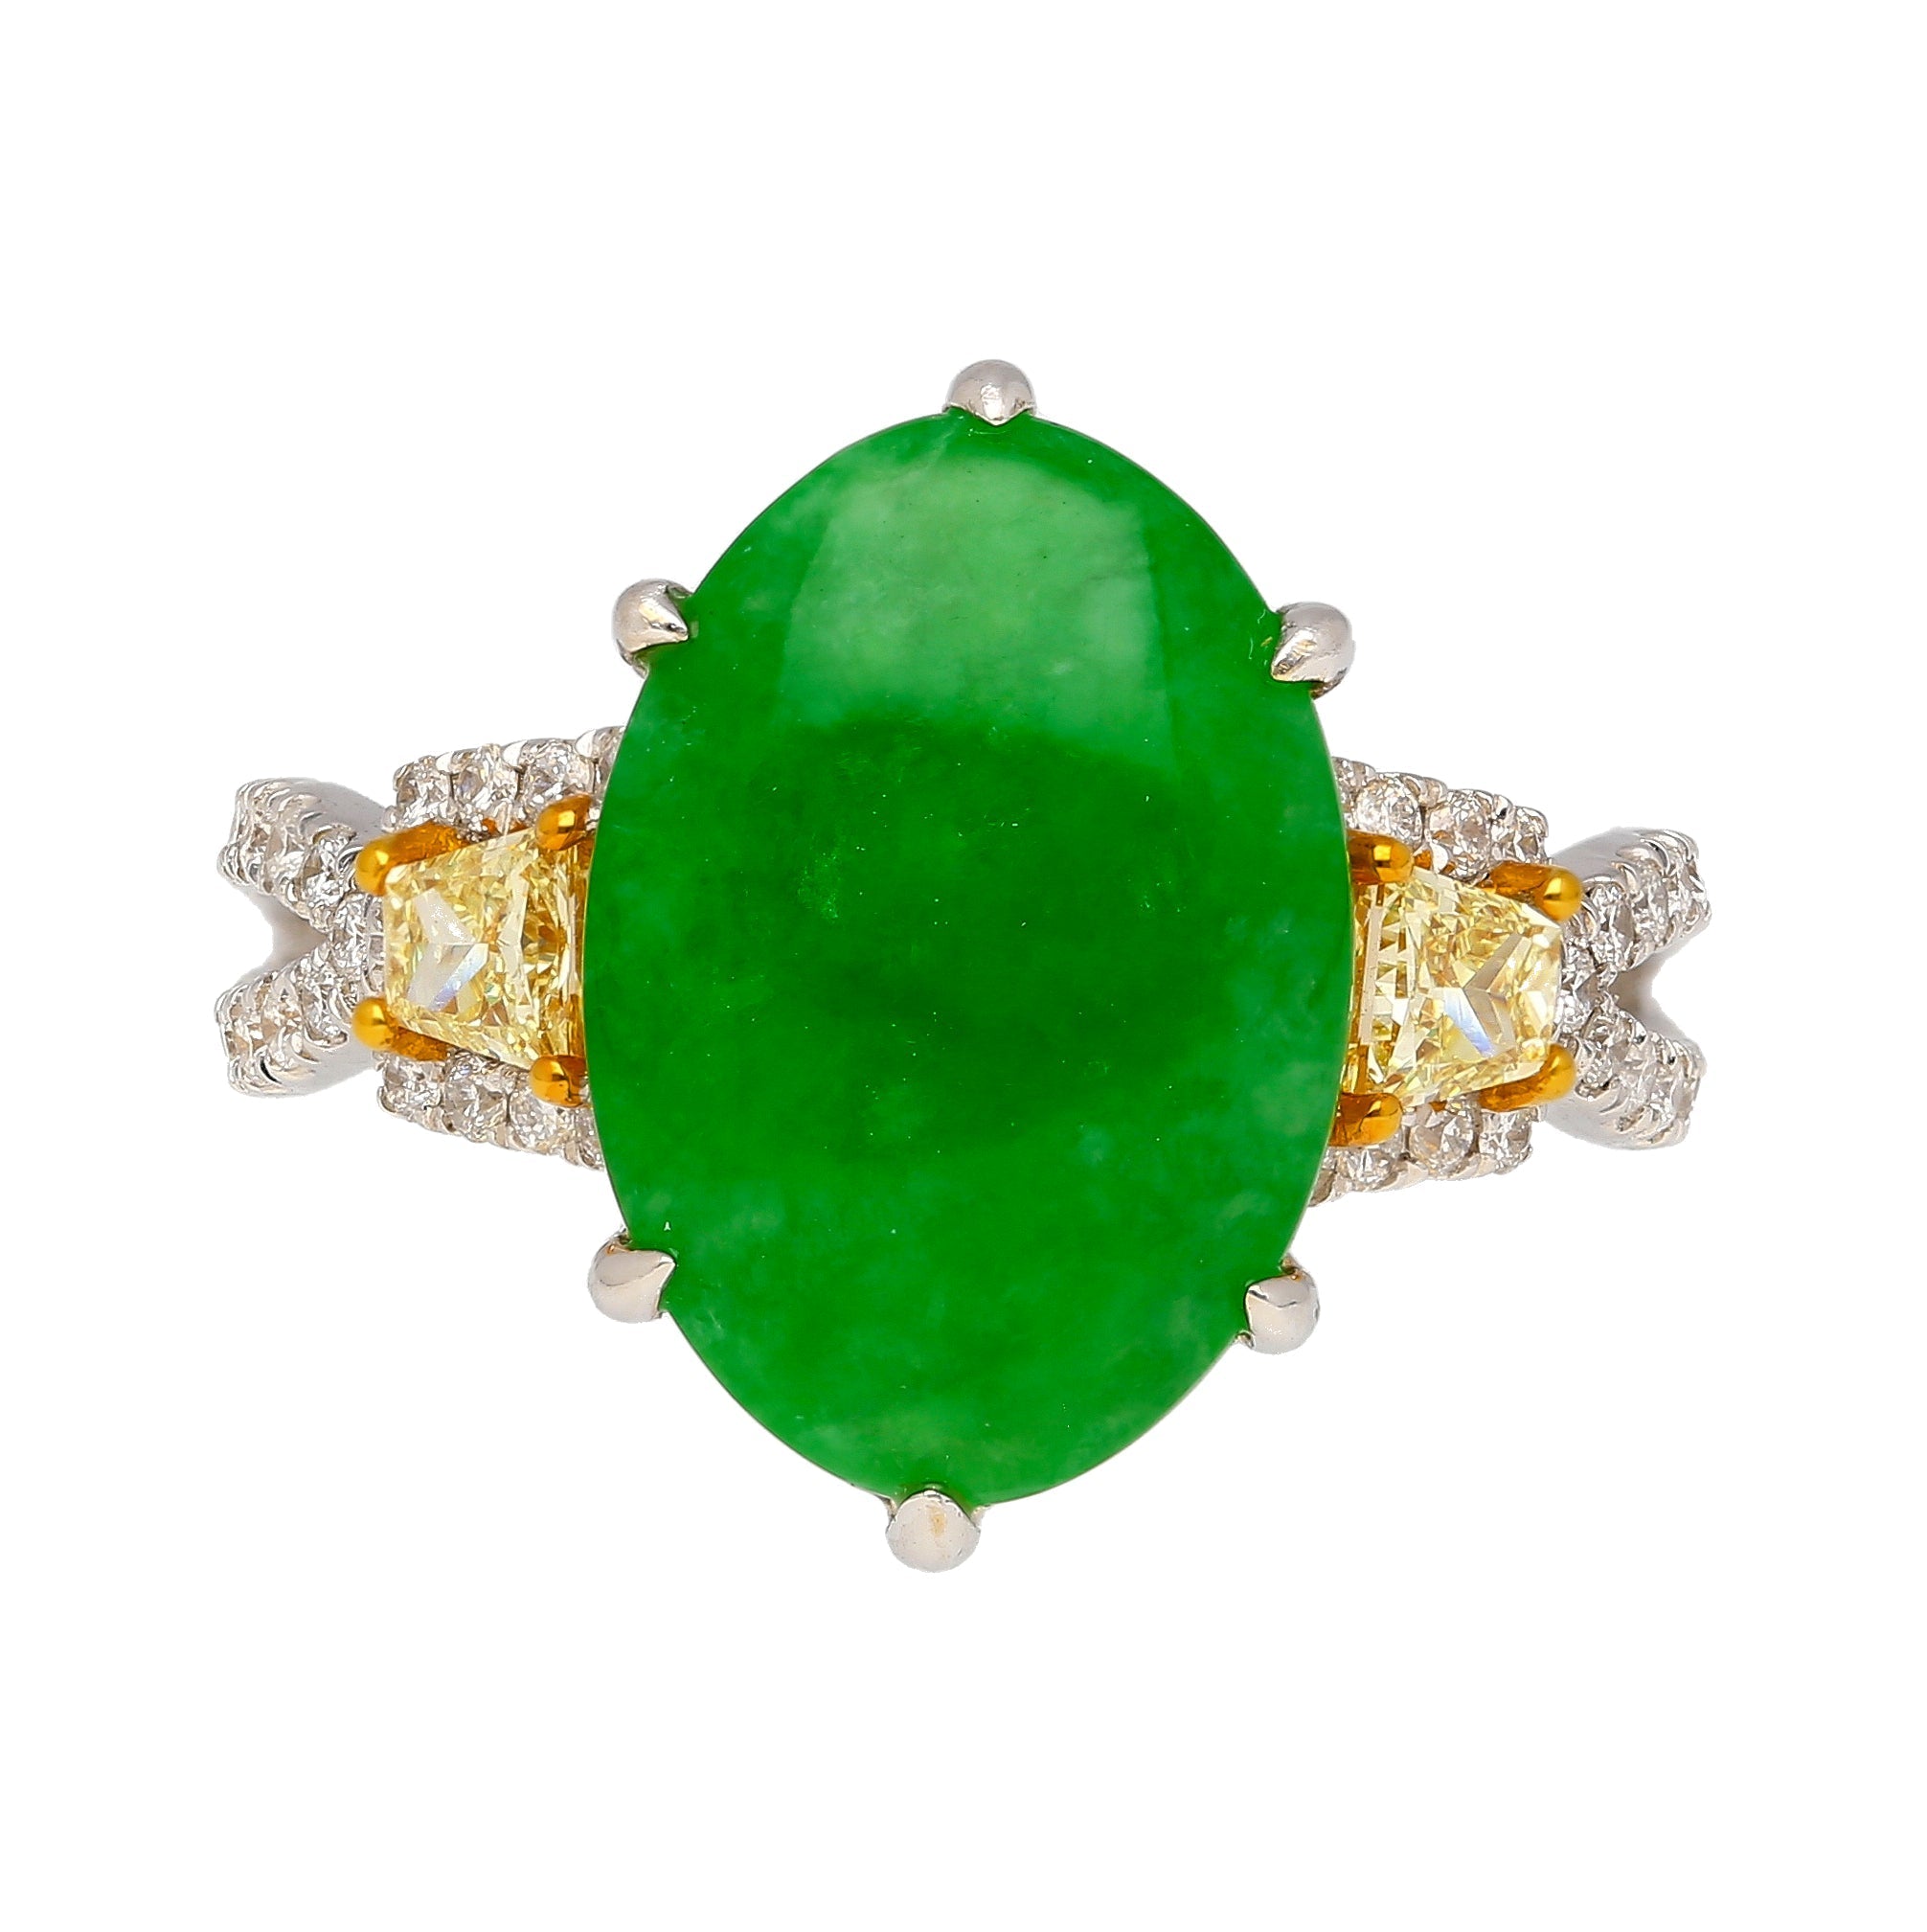 4.76 Carat Jadeite Jade with Trapezoid Cut Yellow Diamond Side Stone Ring in 18k White Gold-Rings-ASSAY